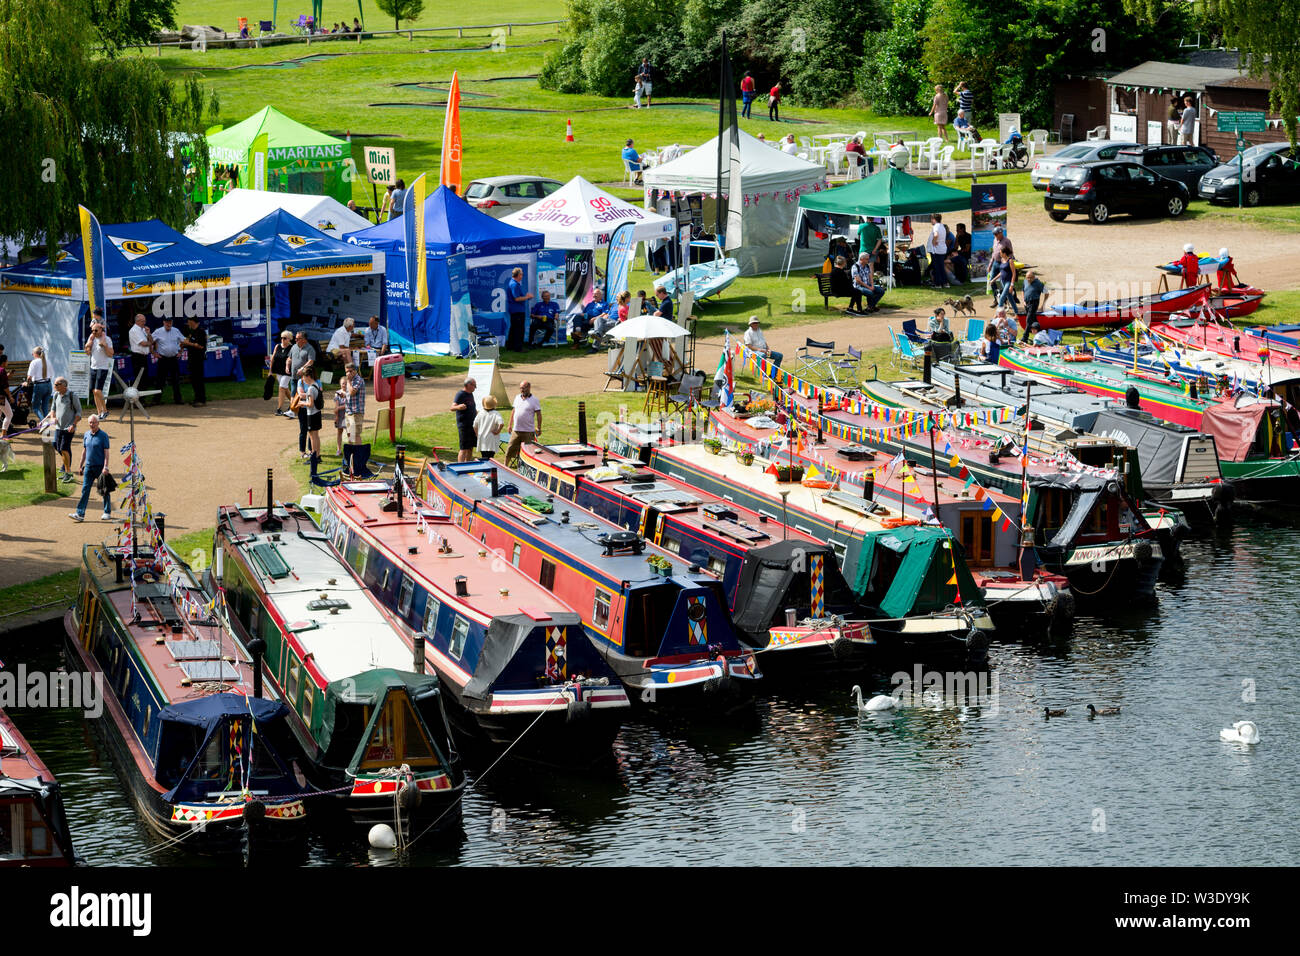 Narrowboats tied up on the River Avon at the 2019 Stratford-upon-Avon River Festival, UK Stock Photo